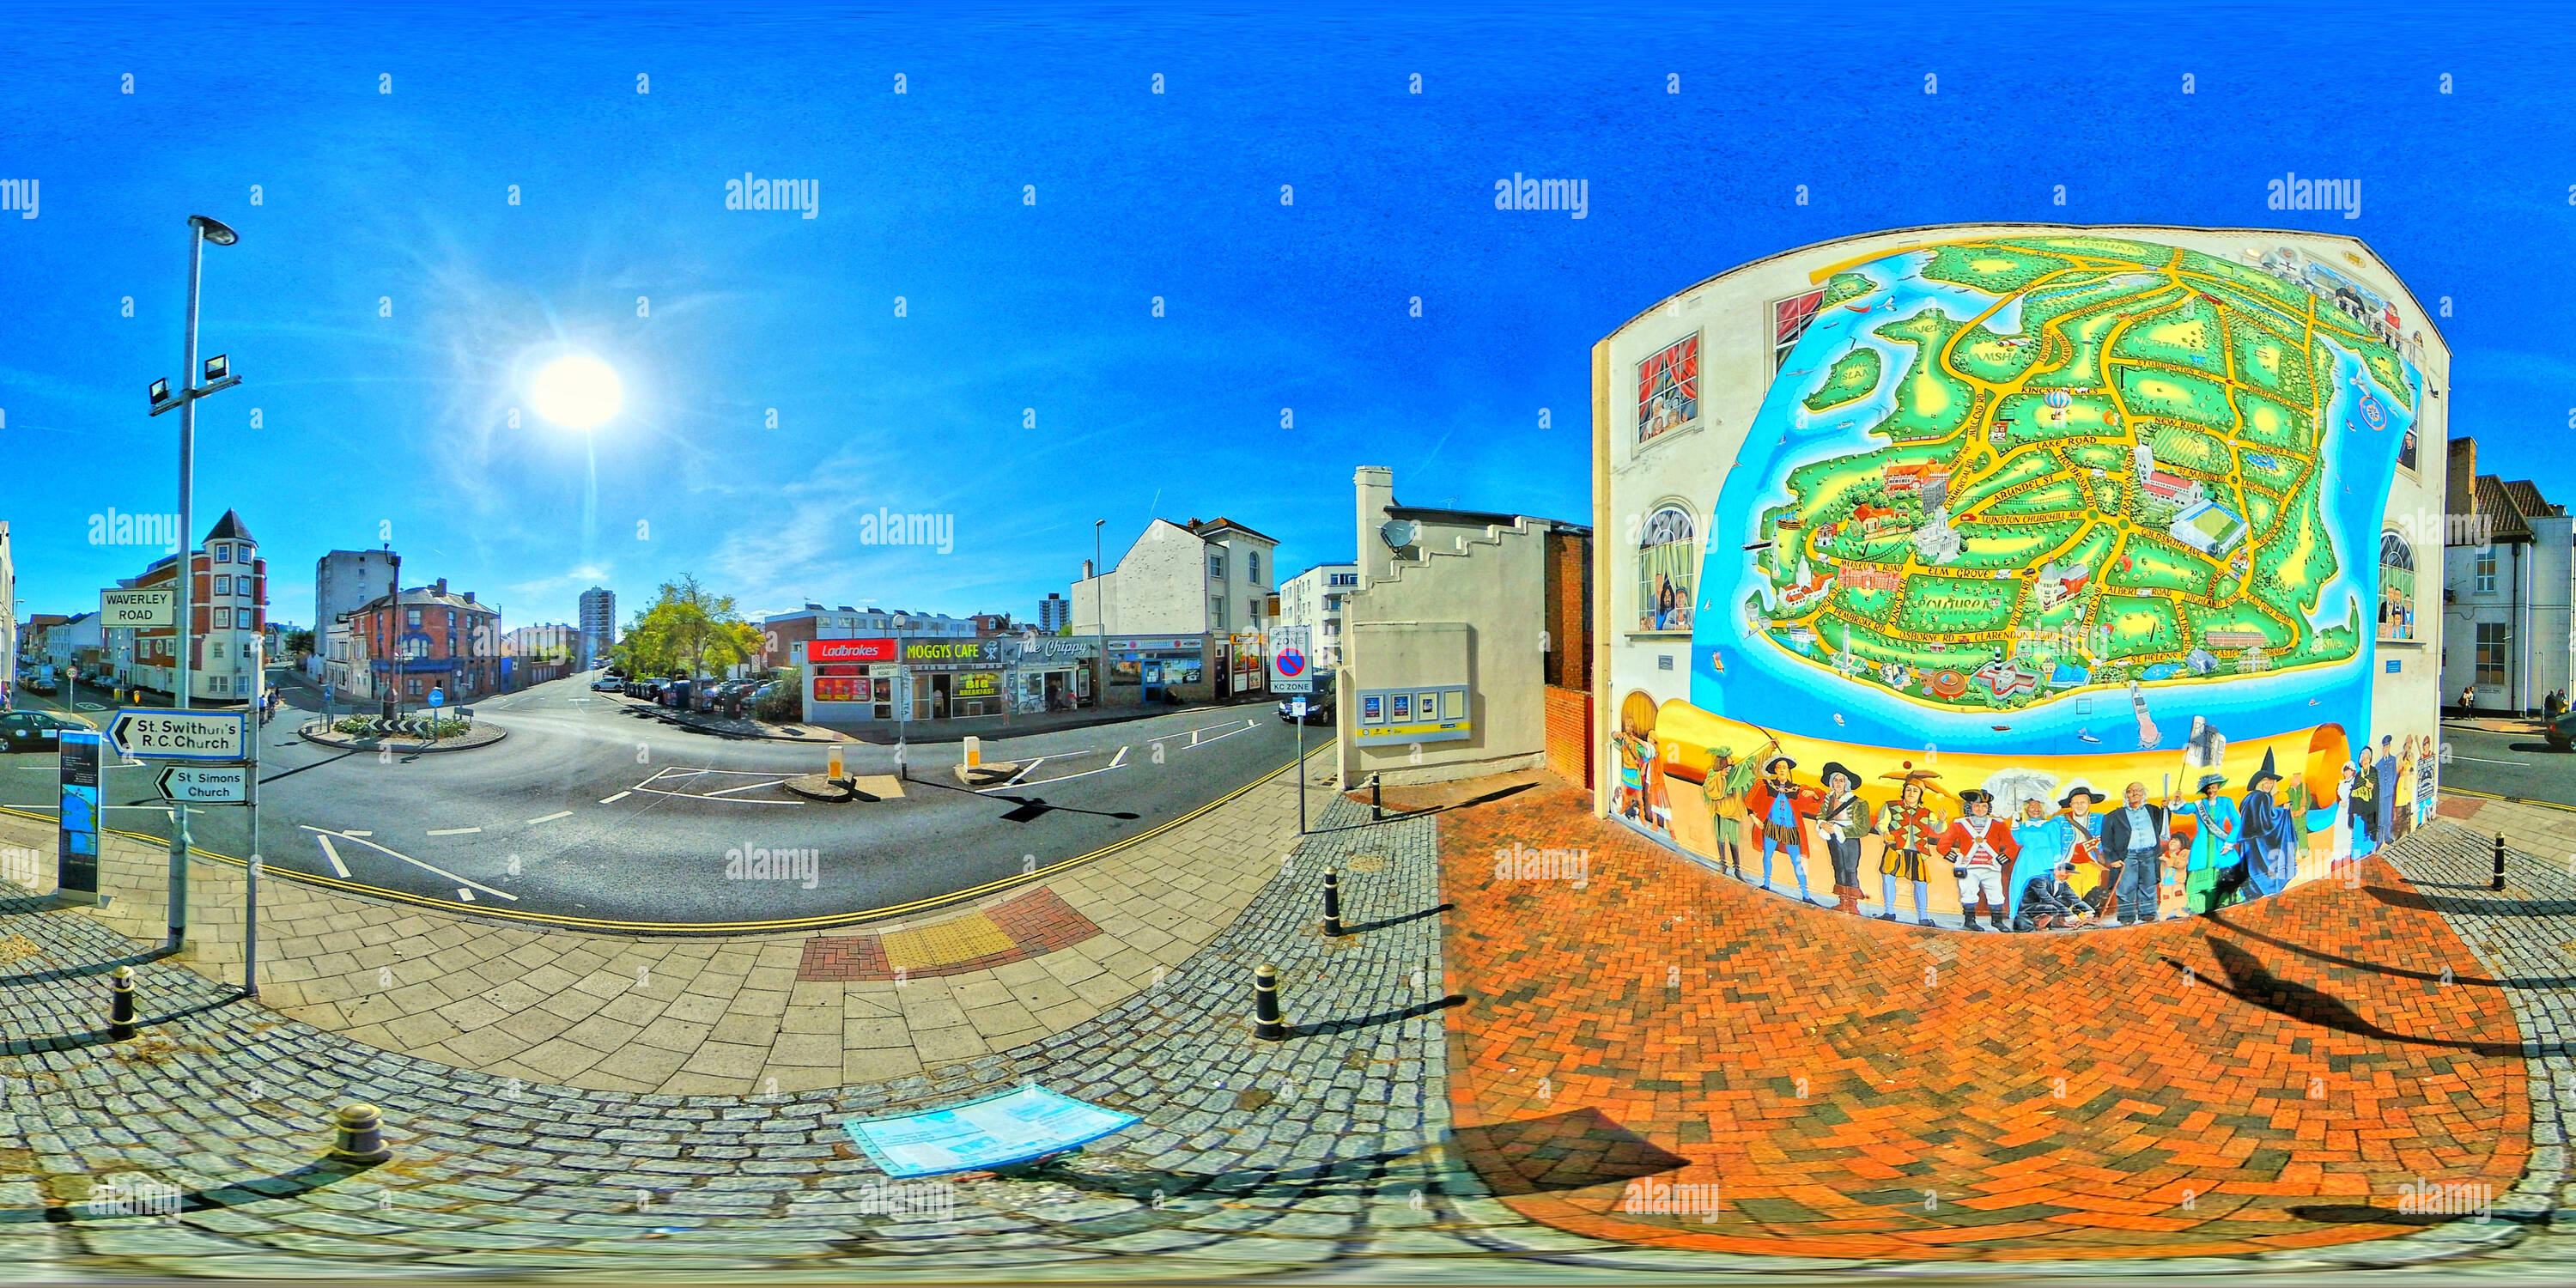 The Strand City Map Murial Advertising Portsea Island In Southsea Portsmouth Hampshire England October 2018 PTT47R 